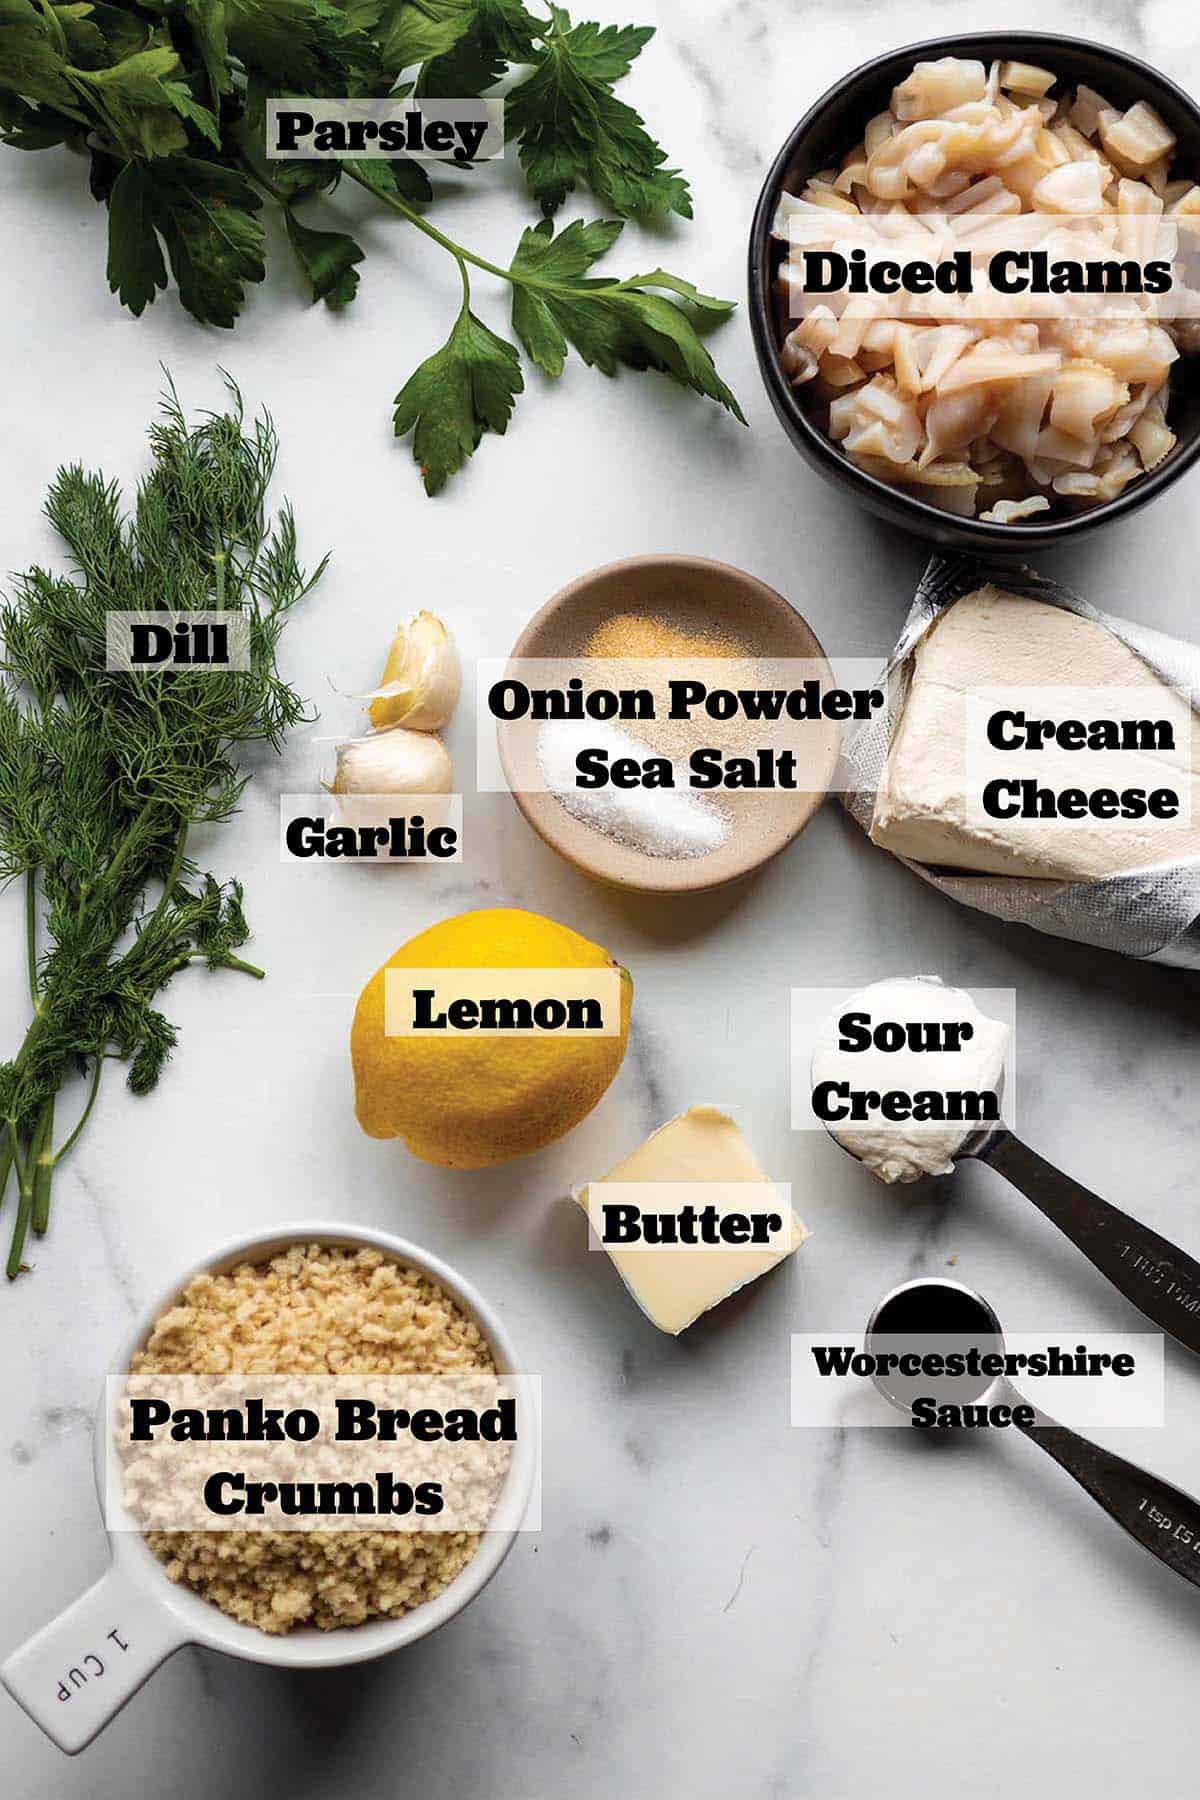 Ingredients laid out in prep bowls, fresh herbs, lemon, butter, and garlic.